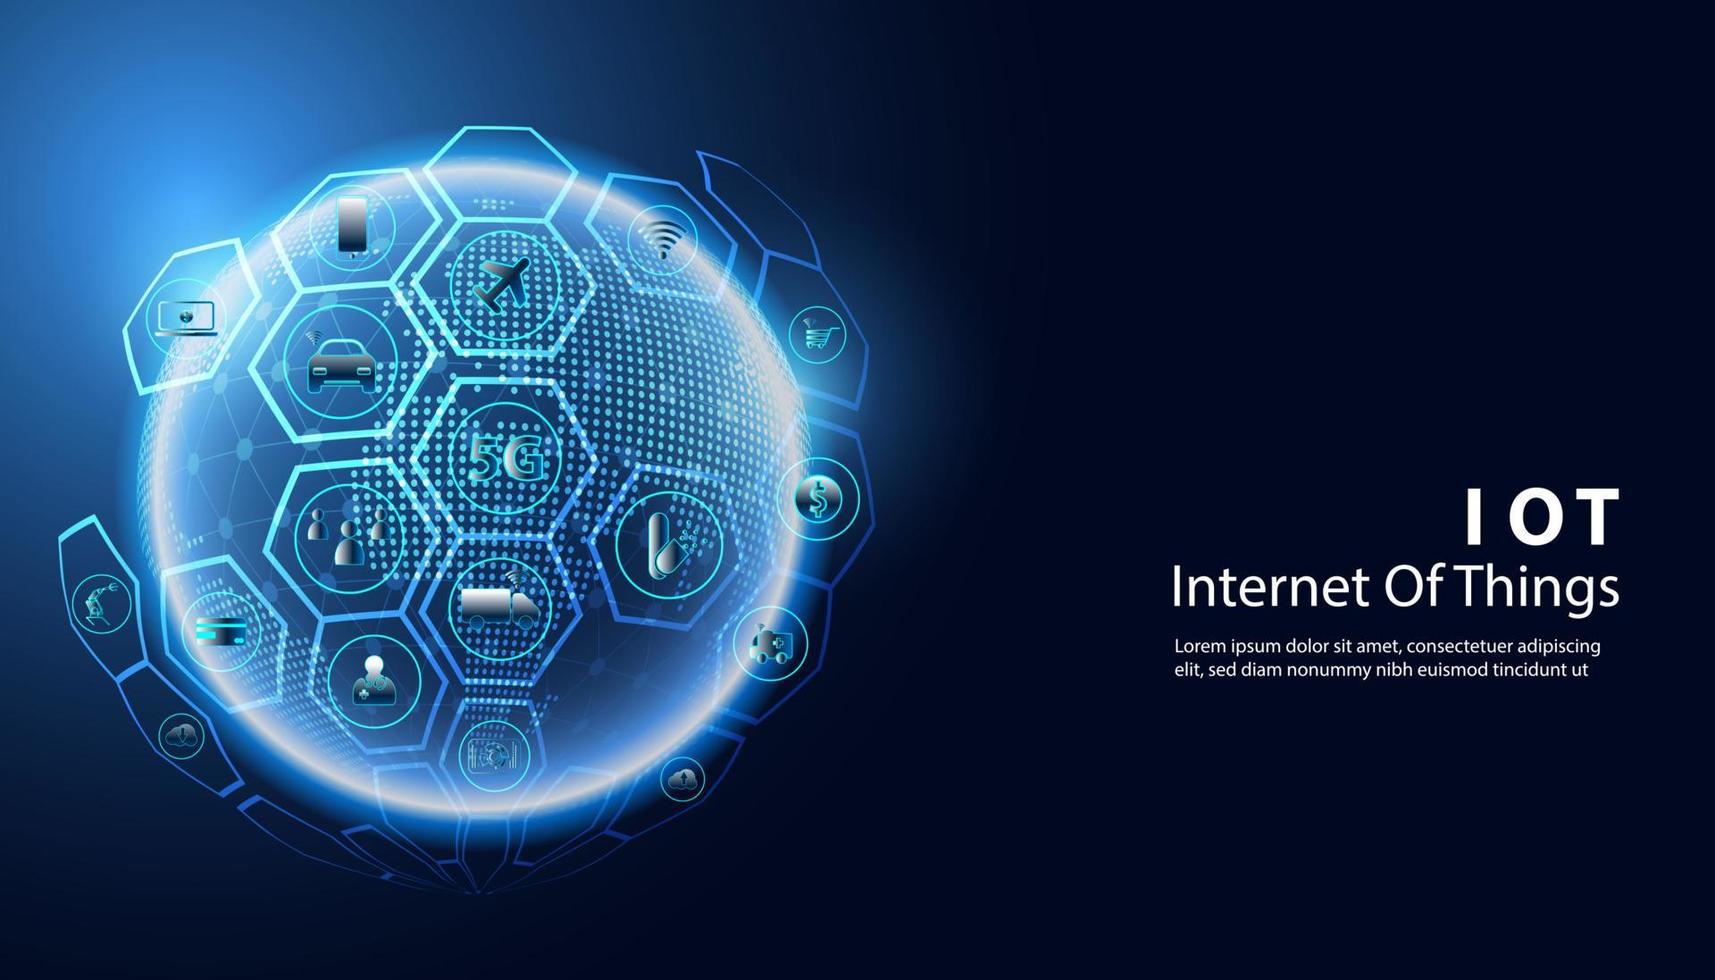 Abstract Internet of things Concept city 5G.IoT Internet of Things communication network Innovation Technology Concept Icon. Connect wireless devices and networking Innovation Technology. vector